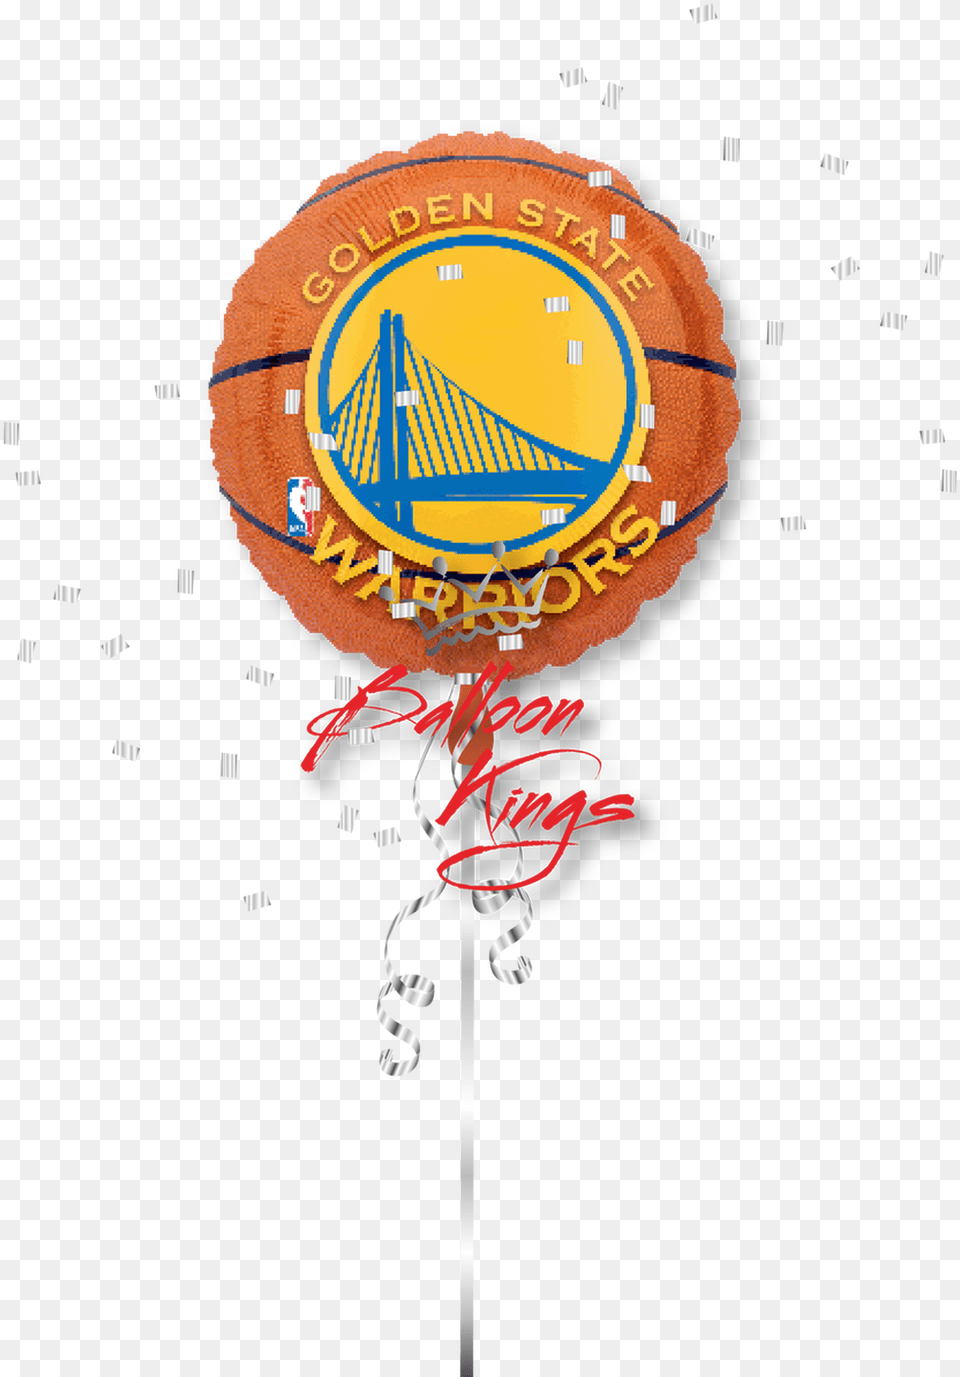 Golden State Warriors Basketball Ballons, Food, Sweets, Candy Free Png Download